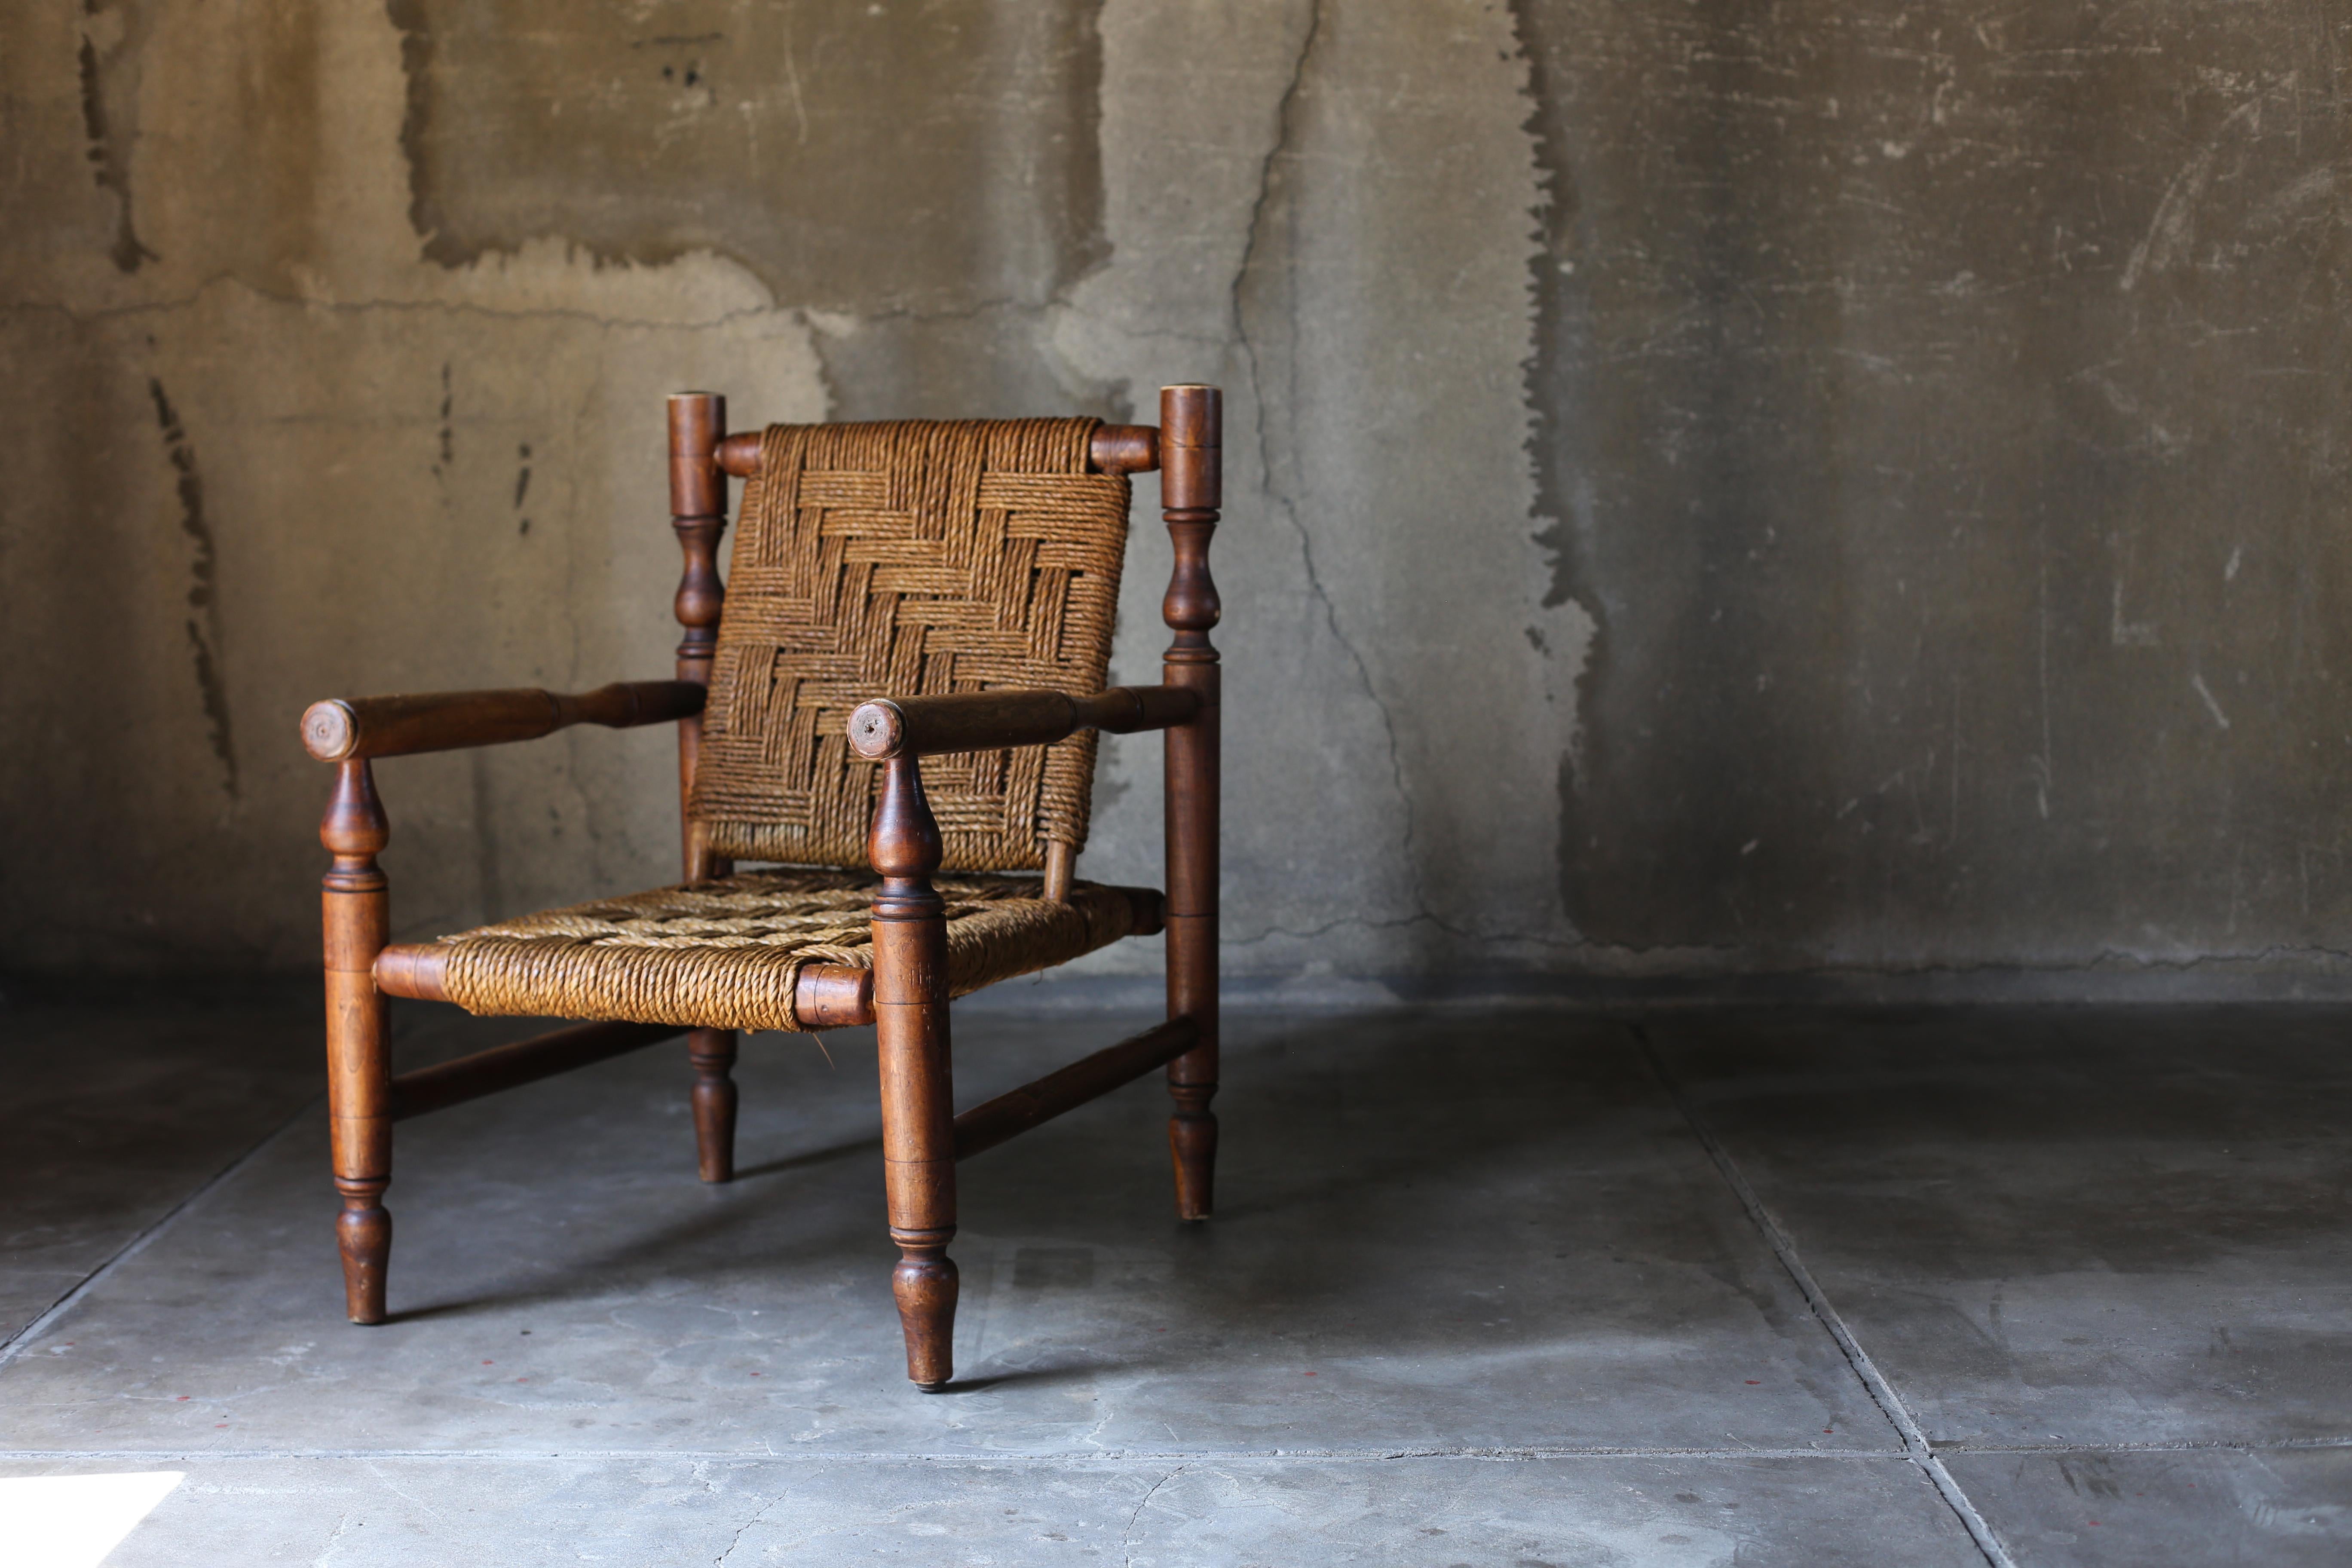 Armchair by Adrien Audoux and Frida Minet.
Made in France, circa 1950s.
Fantastic patina to wood
Beechwood and abaca rope.